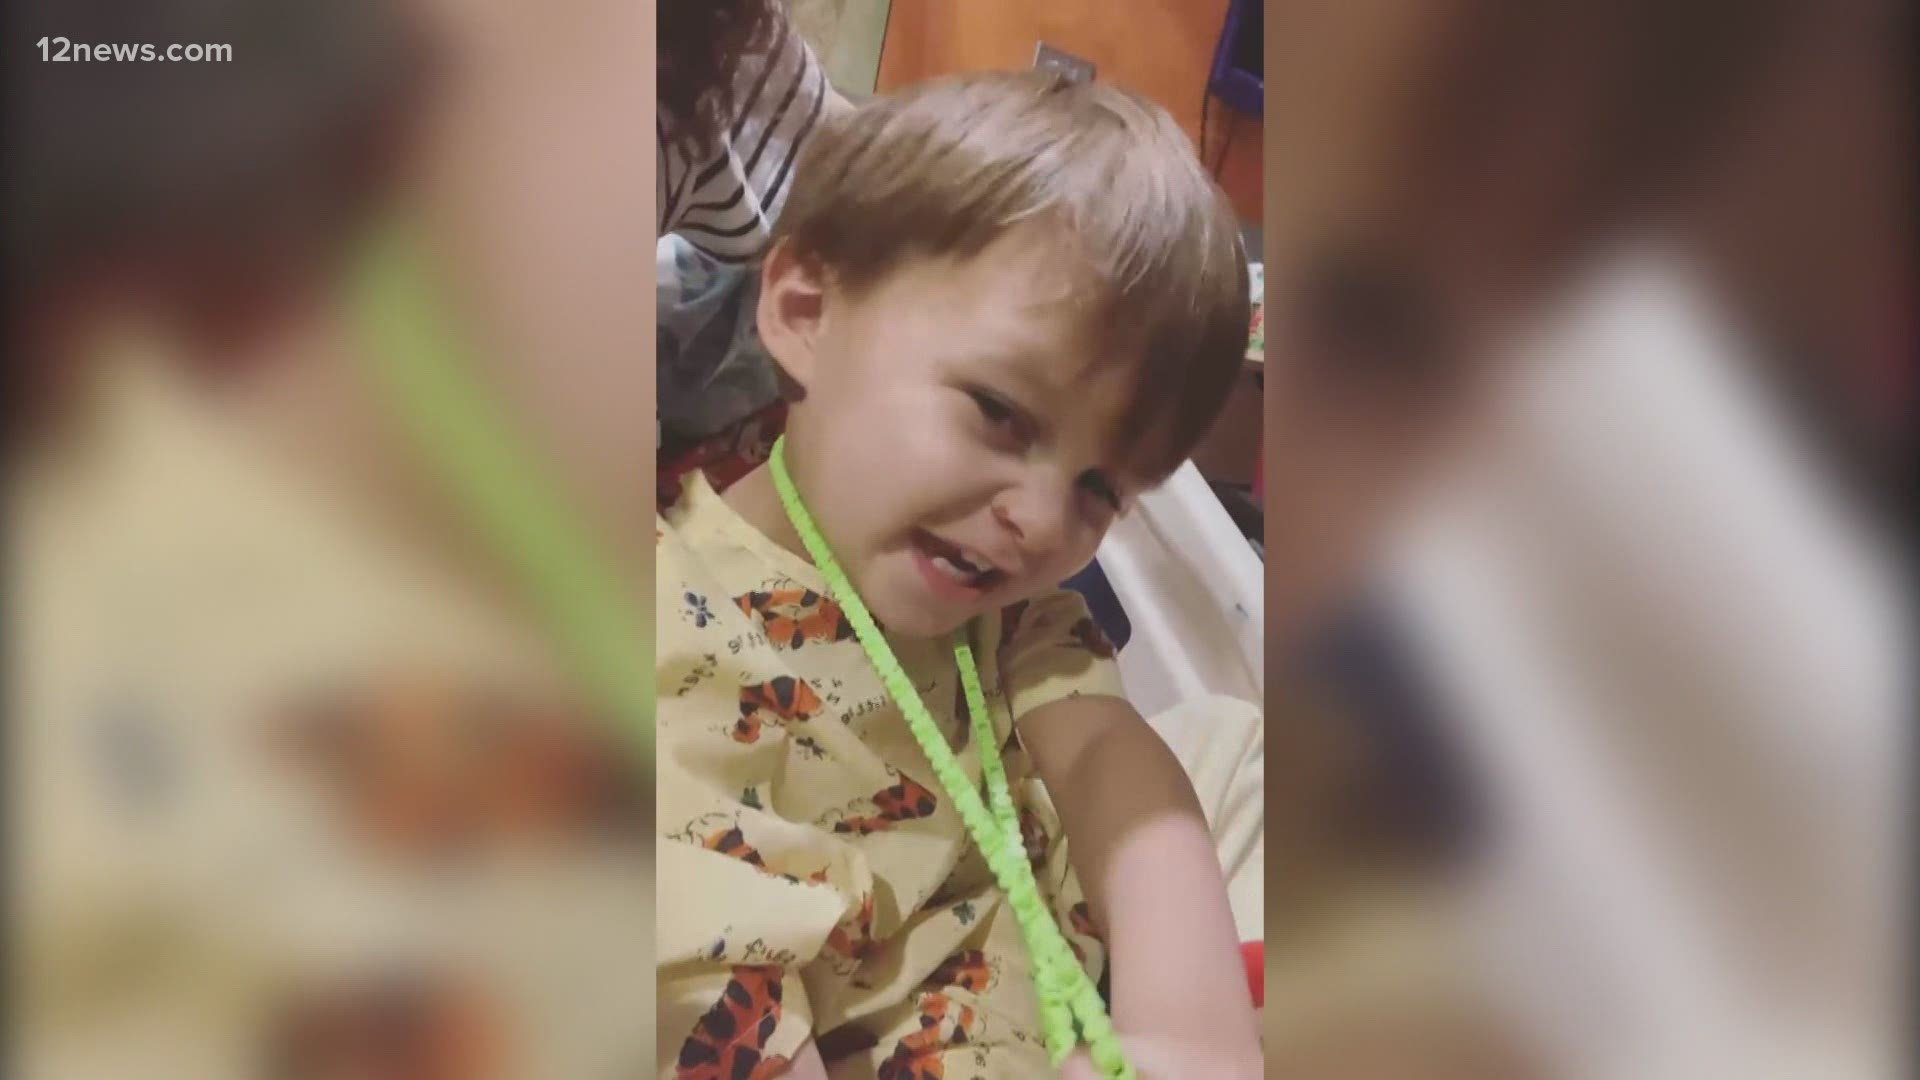 A Tempe mother heard something no parent ever wants to hear after her 3-year-old son fell off his bike, her son Michael has a large brain tumor.